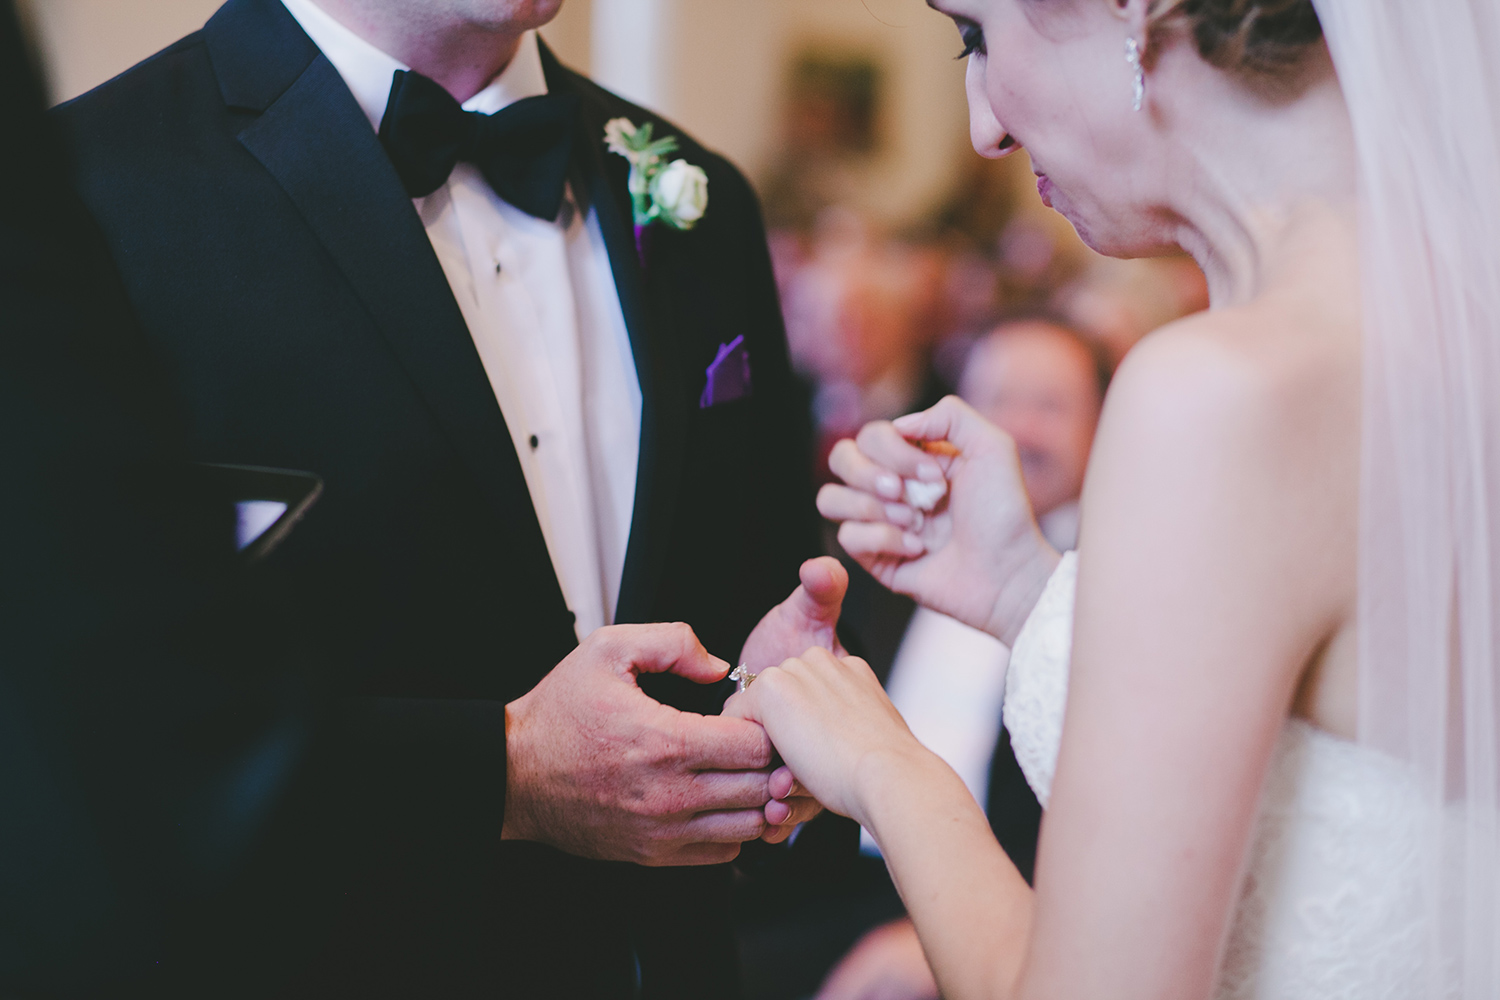 Bride and groom with lavender boutonniere holding hands at ceremony 